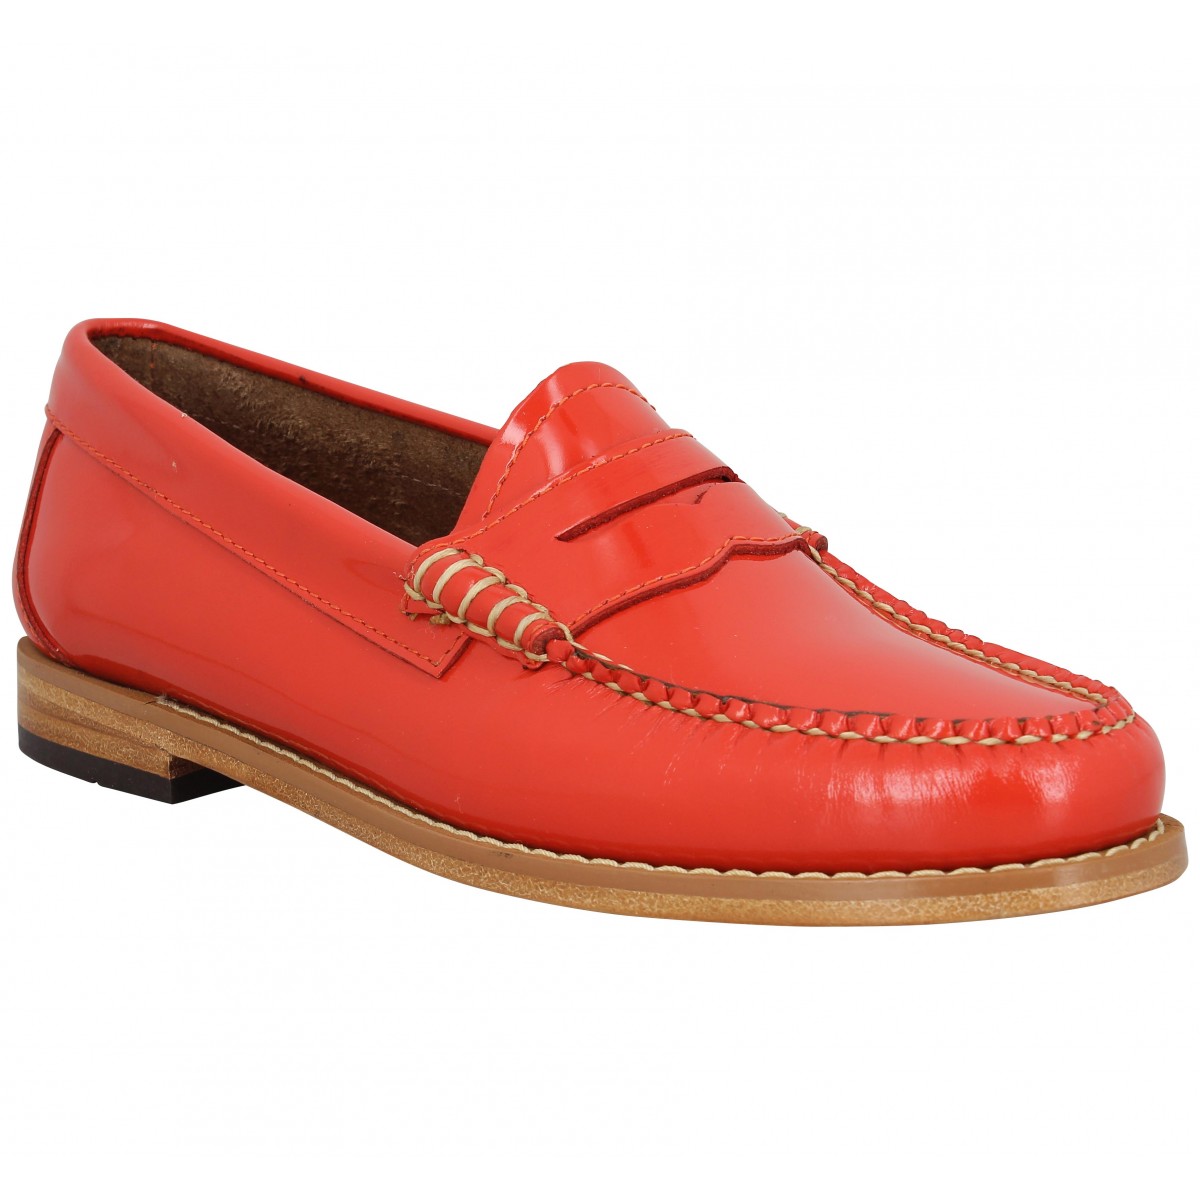 Mocassins GH BASS & CO Weejuns Penny Wheel vernis Femme Corail